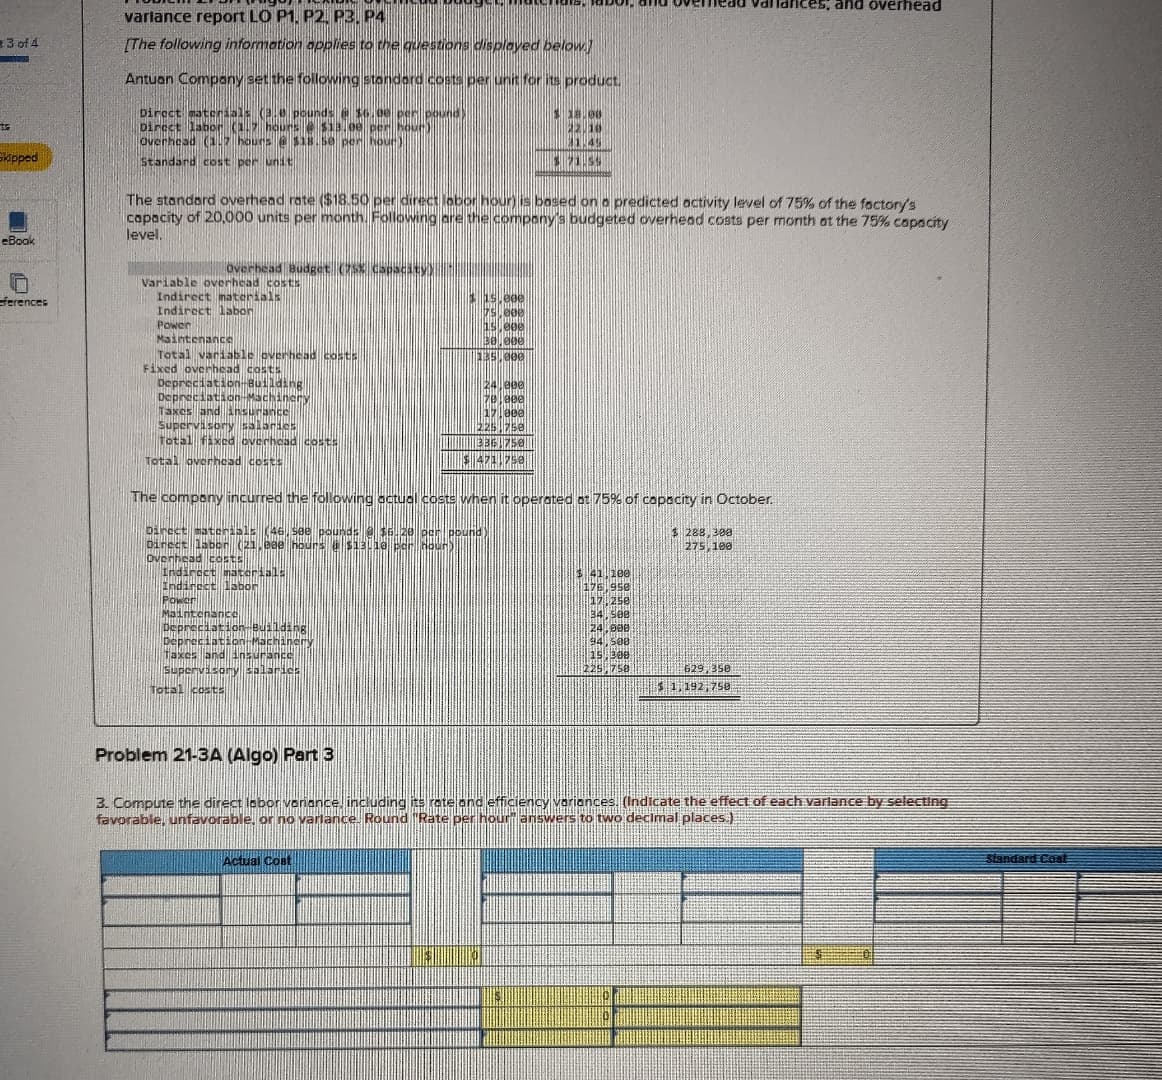 variance report LO P1, P2, P3, P4
3 of 4
[The following information applies to the questions displayed below)
and overhead
Skipped
eBook
ferences
Antuan Company set the following standard costs per unit for its product.
Direct materials (3.0 pounds @ $6.00
Direct labor (1.7 hours $13.00
Overhead (1.7 hours $18.50 per hour
Standard cost per unit
$ 18.00
The standard overhead rate ($18.50 per direct labor hour) is based on a predicted activity level of 75% of the factory's
capacity of 20,000 units per month. Following are the company's budgeted overhead costs per month at the 75% capacity
level.
Overhead Budget (75% Capacity)
Variable overhead costs
Indirect materials
Indirect labor
15.000
Power
Maintenance
000
$0.000
Total variable overhead costs
135,000
Fixed overhead costs
Depreciation-Building
24.000
1701800
17.000
225.750
13361750
$ 471,750
Depreciation-Machinery
Taxes and insurance
Supervisory salaries
Total fixed overhead costs
Total overhead costs
The company incurred the following actual costs when it operated at 75% of capacity in October.
Direct materials (46, see pounds @ $6.
Direct labor (21,080 hours @ $13110 p
pound
Overhead costs
Indirect materials
Indirect labor
Maintenance
Depreciation-Building
Depreciation Machinery
Taxes and insurance
Supervisory salaries
Total costs
$ 288,300
275,100
41 100
176,950
17,250
34,500
24,000
94,500
15.300
225,758
629, 350
$1,192,750
Problem 21-3A (Algo) Part 3
3. Compute the direct labor variance, including its rate and efficiency variances. (Indicate the effect of each varlance by selecting
favorable, unfavorable, or no varlance. Round "Rate per hour" answers to two decimal places.)
Actual Cost
Standard Cost